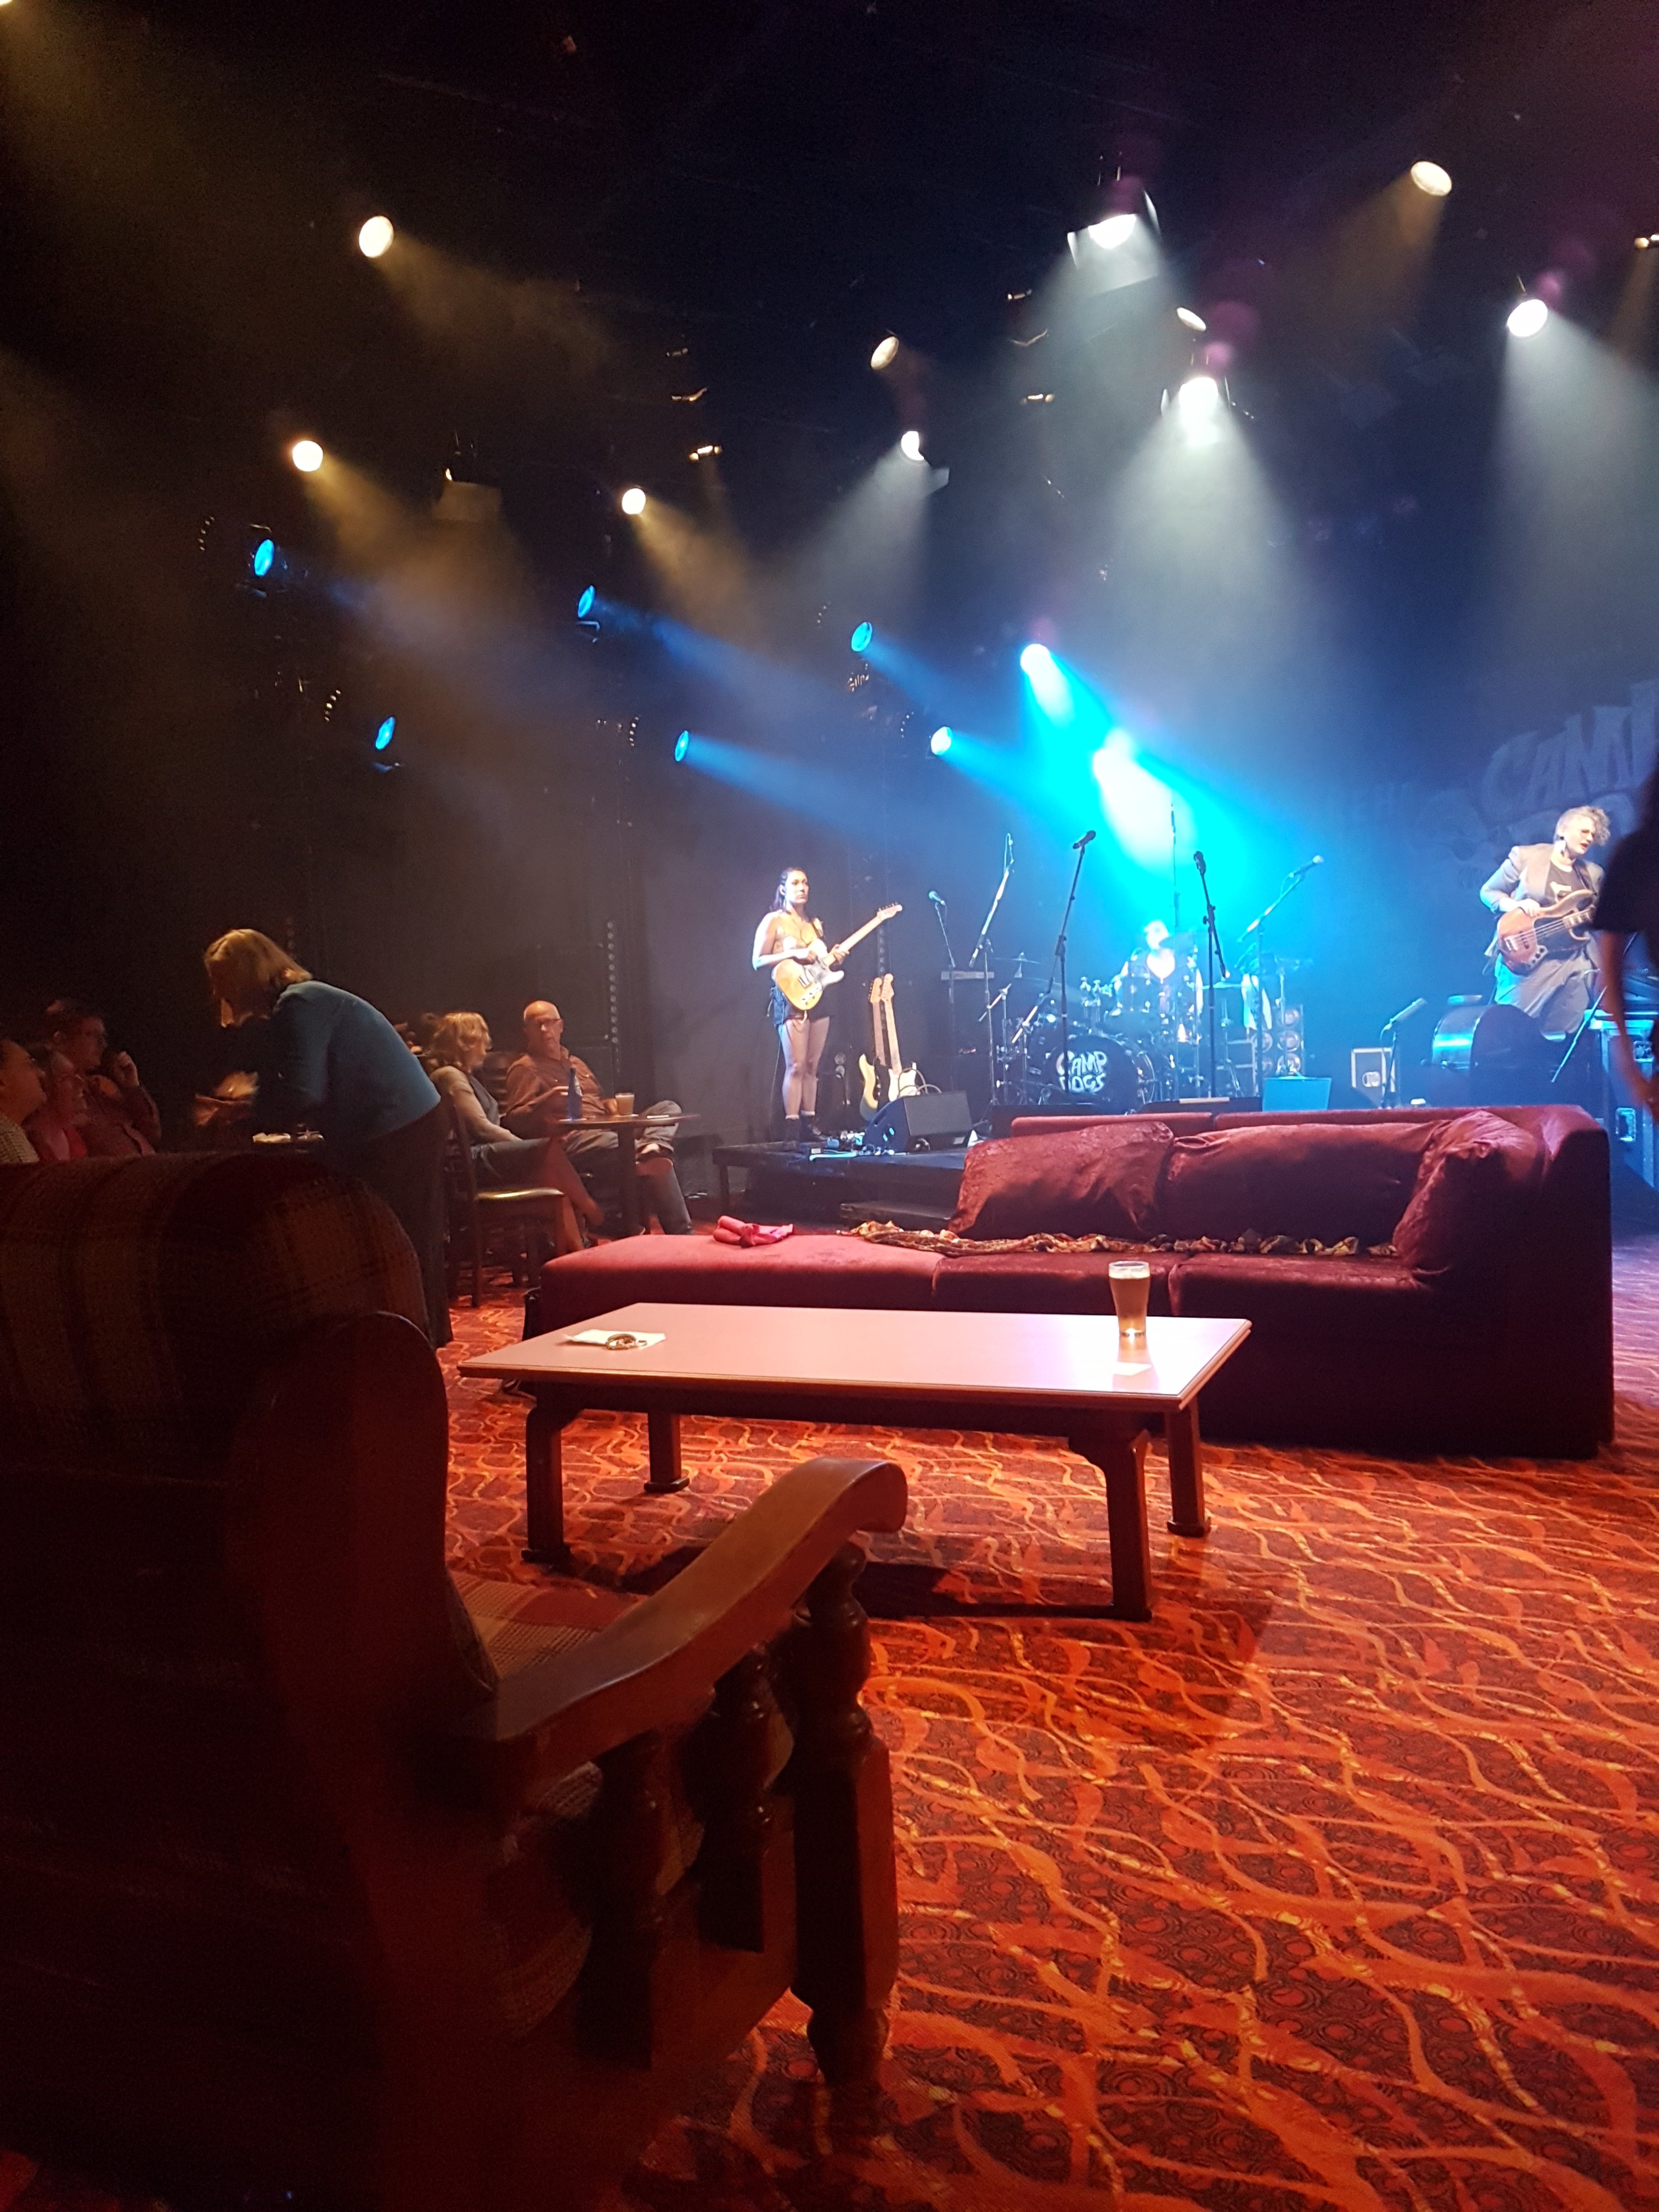 An open stage is set up to look like a lounge room, with velvet couches and large chairs. A beer sits on top of a coffee table. On the side background, the audience can be seen looking to the stage. In the far background, a woman is bent over talking to the audience, while band members are practising on their guitars onstage